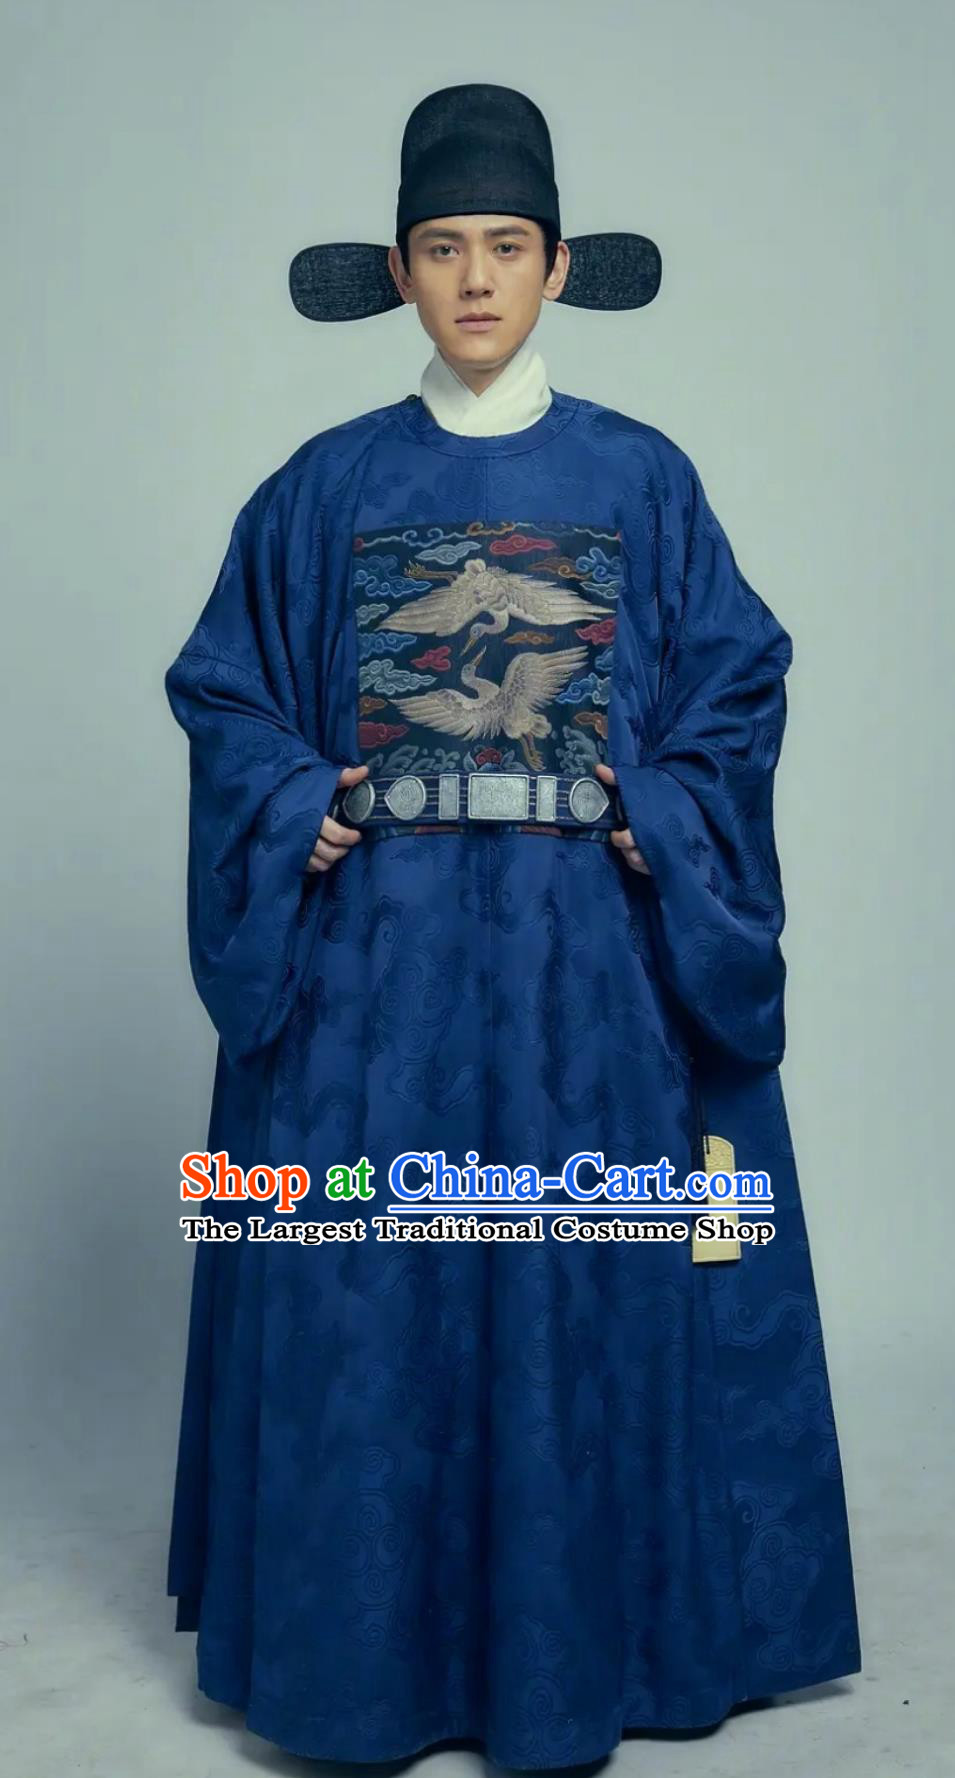 China Ming Dynasty Official Garment Costumes Ancient Hanfu Clothing TV Series Song of Youth Childe Sun Shi Jie Blue Robes